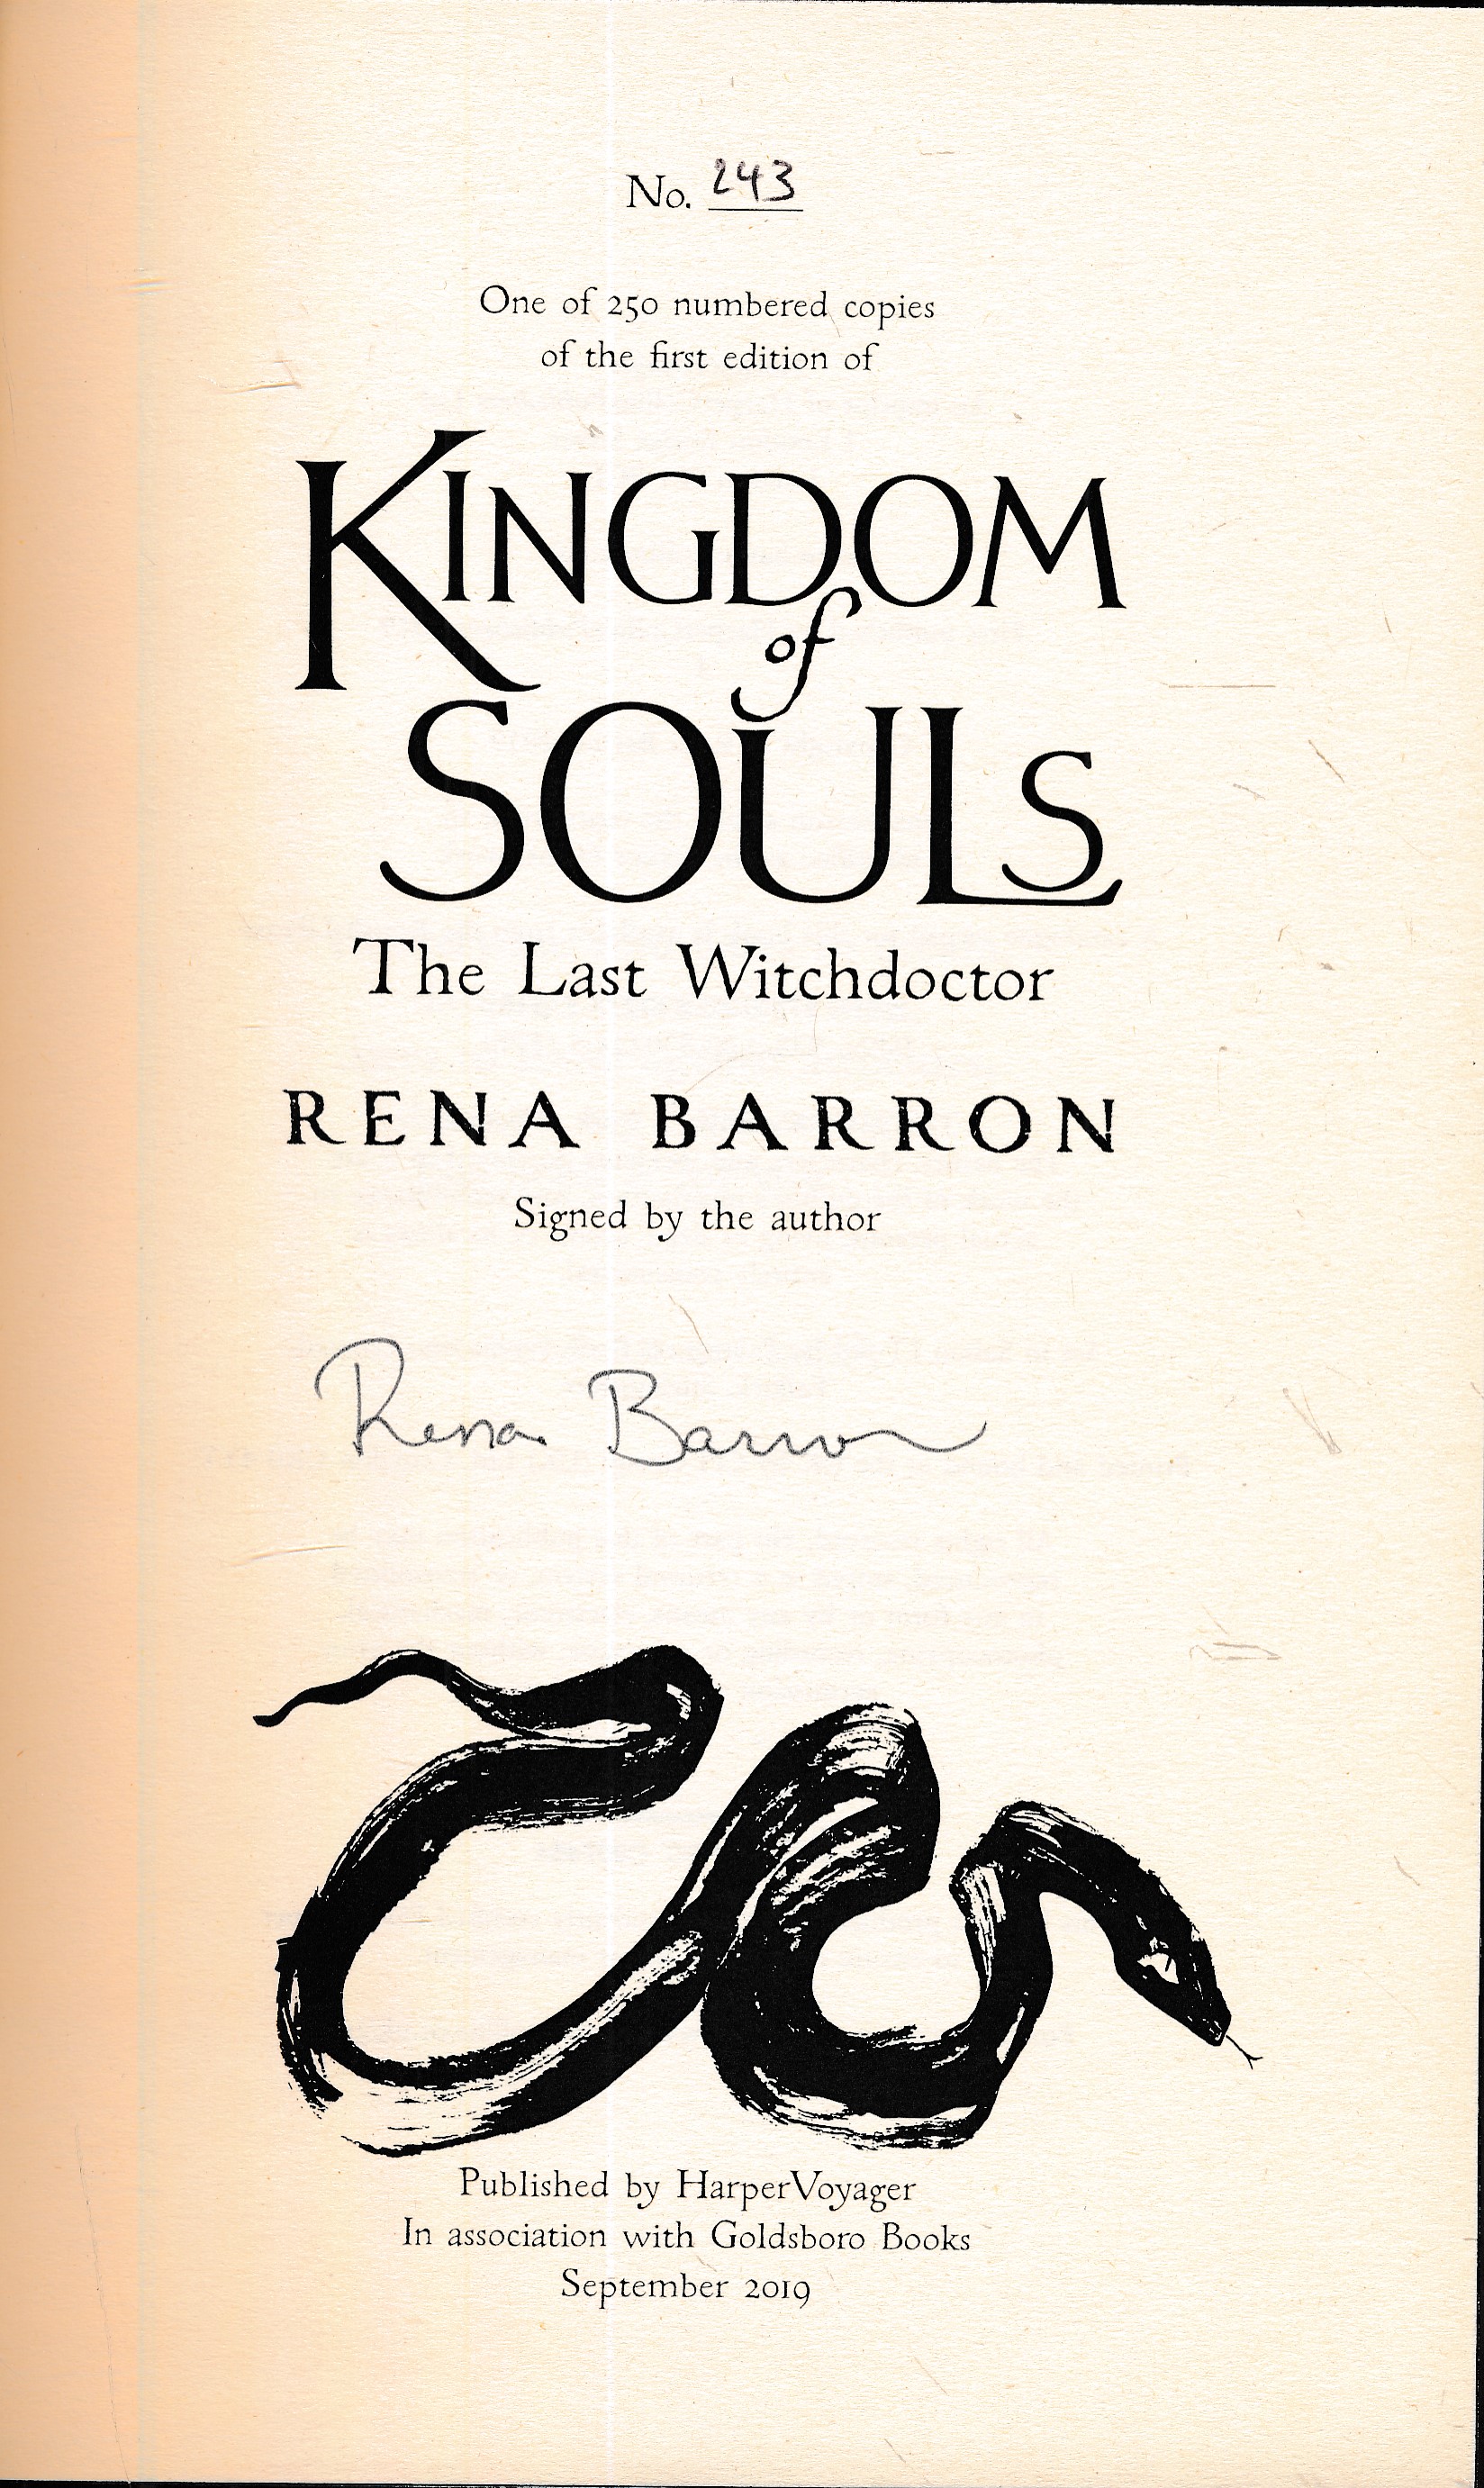 Kingdom of Souls. The Last Witchdoctor. Signed Limited edition.